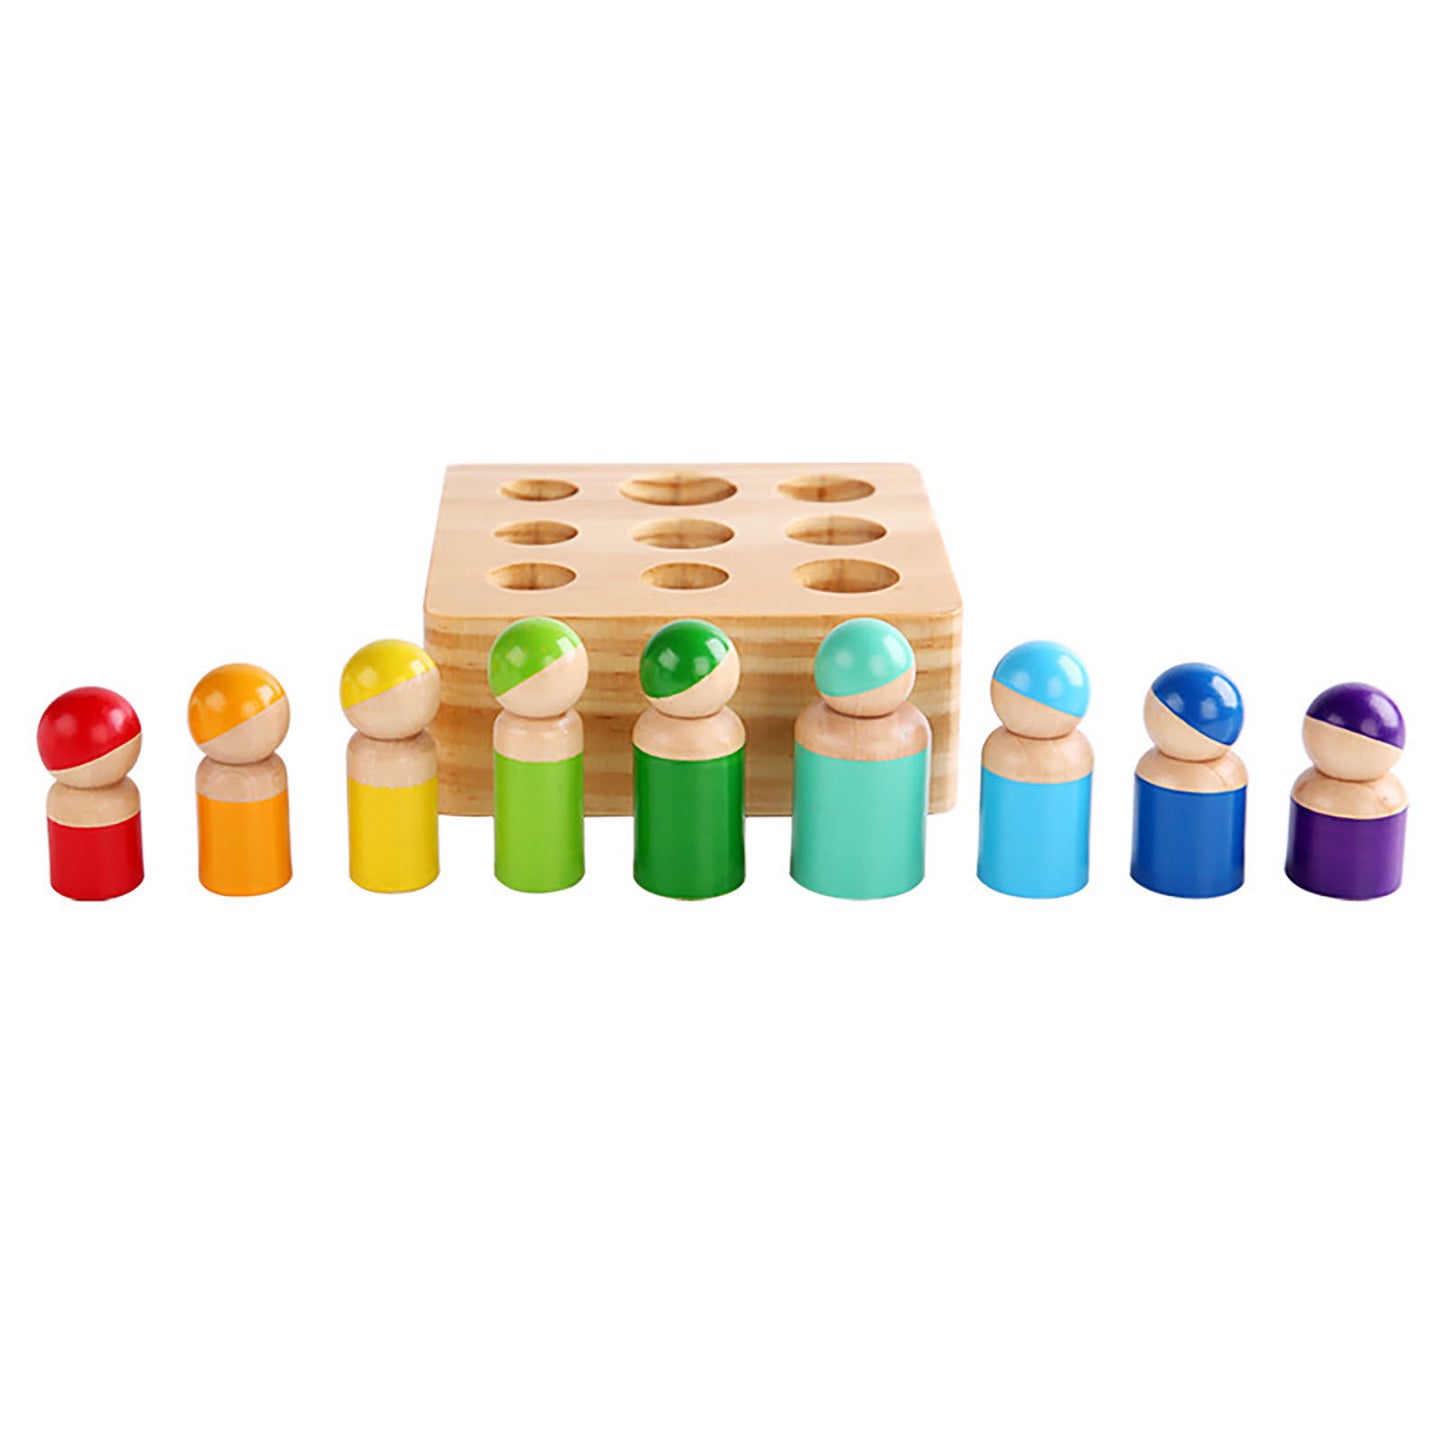 NOOLY Wooden Rainbow Peg Dolls Toys, Montessori Matching Puzzle Toy for 3+ Years Old Boys and Girls?CHR-01